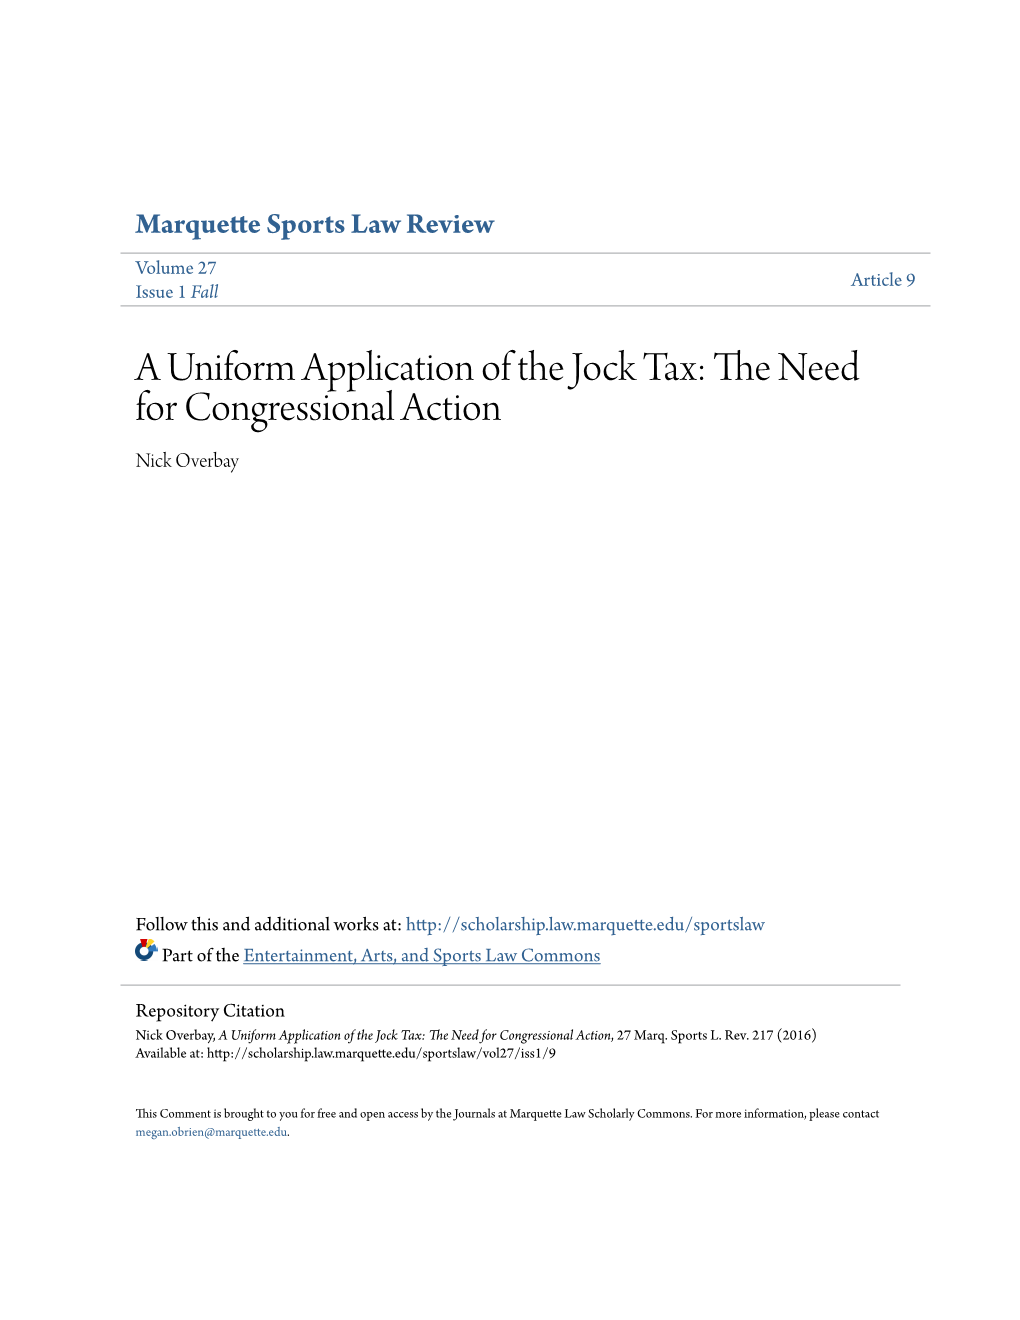 A Uniform Application of the Jock Tax: the Eedn for Congressional Action Nick Overbay